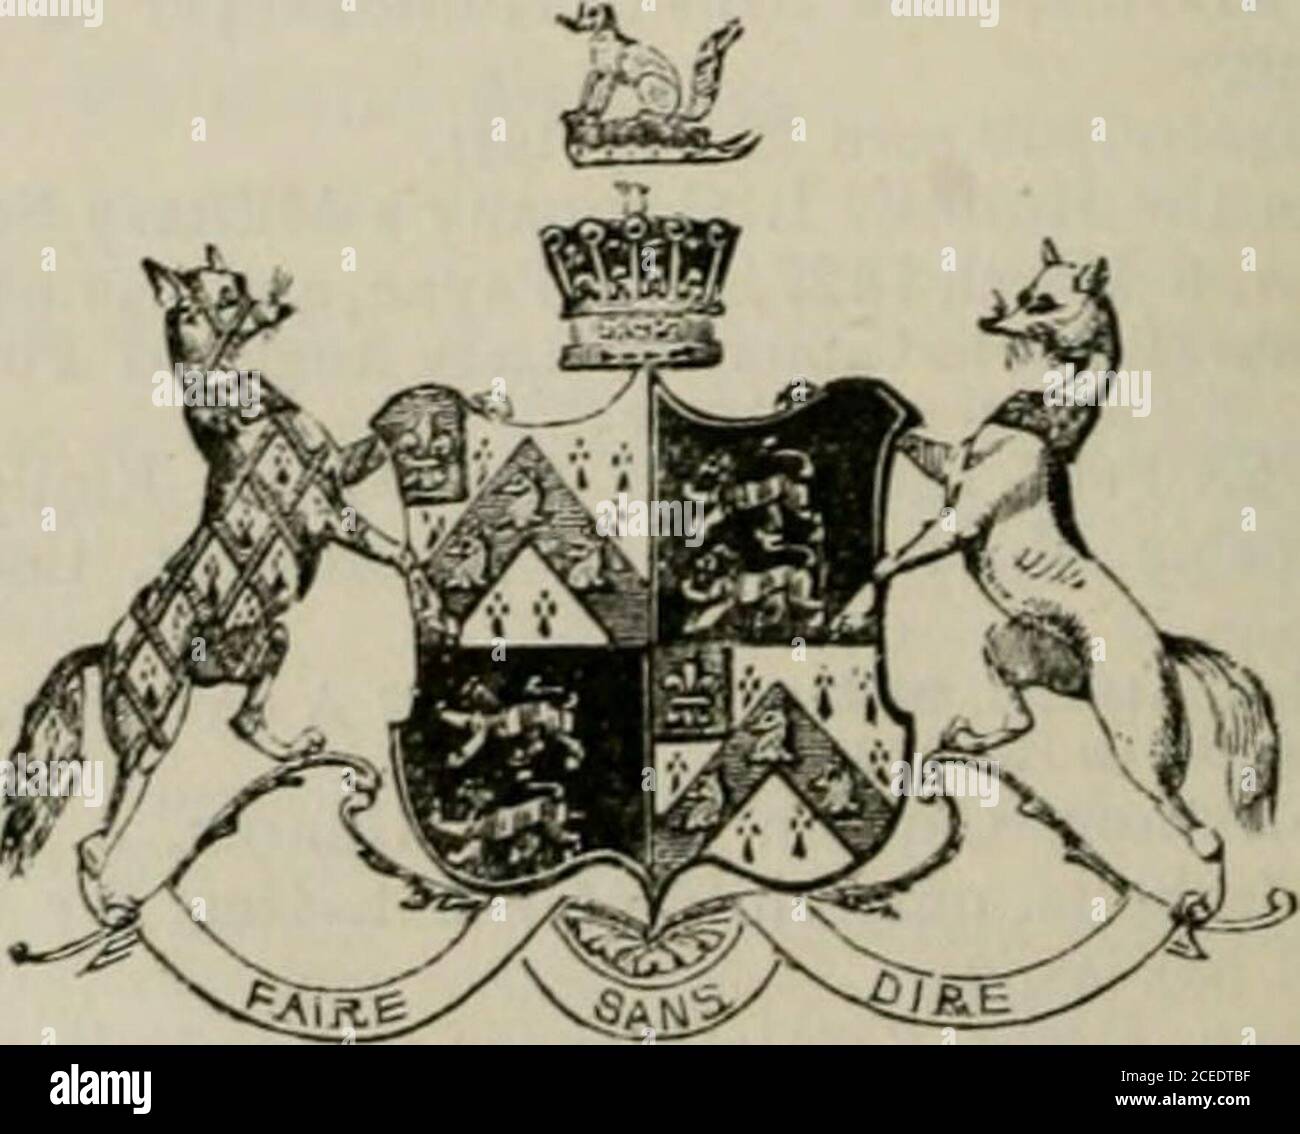 . The peerage of the British Empire as at present existing : arranged and printed from the personal communications of the nobility. Gordon of Strathavon and Glenlivet 1660, Scotchhonours; Baron Meldrum of Morven in the United Kingdom, 1815. Bart. 1625. Genealogy.—See Genealogical Volume. Motto.—i^-auao, non astutia : By valour, not by craft—Bydand. Town Residence.—-li. Chapel Street, Grosvenor Place. Seats.—Xhoyne Castle, Aberdeenshire ; and Orton-Longueville, Huntingdon. Collateral ISranctcs. [Issue of the Hon. Lieut.-Col. John Gordon,eldest uncle of the present Marquis.] 1 John, Major-Gen. H Stock Photo